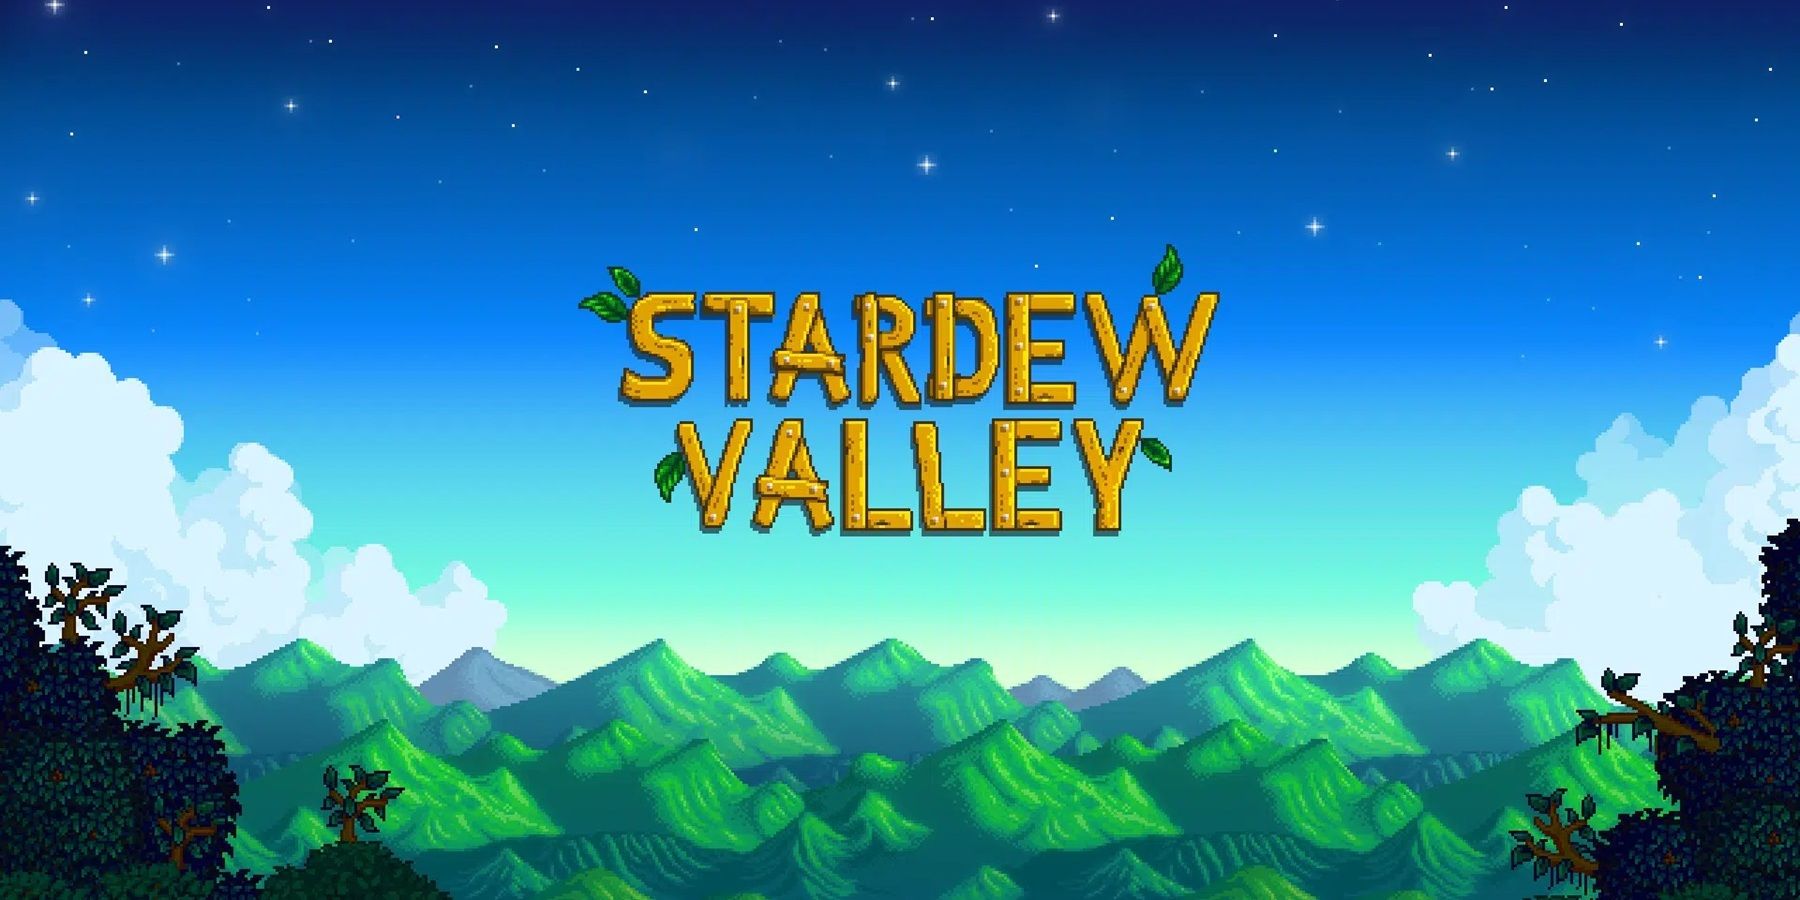 stardew-valley-creator-would-be-interested-in-making-a-movie-but-theres-a-catch